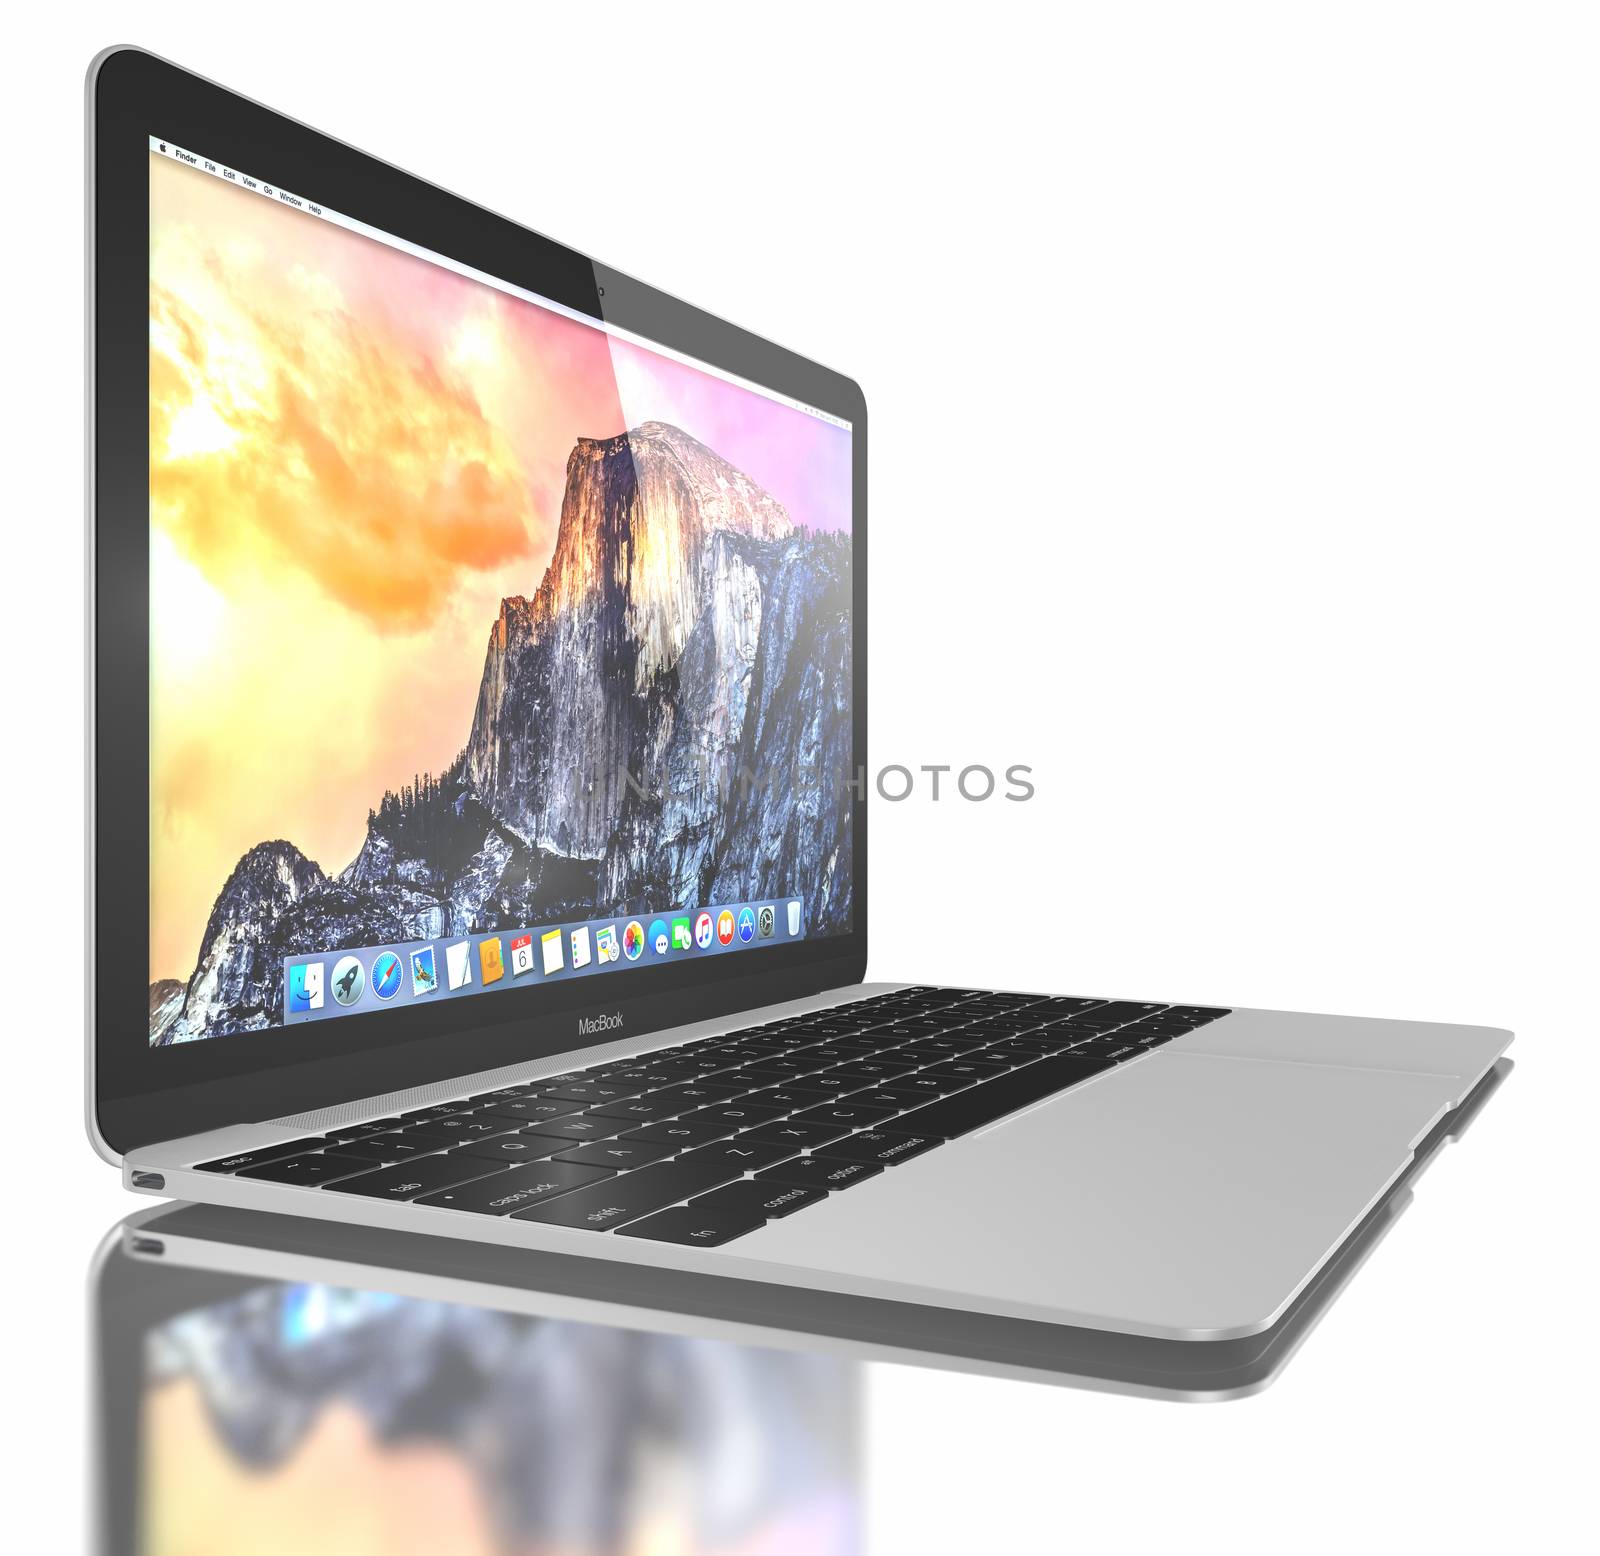 Galati, Romania - July 10, 2015: New Silver MacBook displaying OS X Yosemite. The New MacBook is not only Apple's thinnest and lightest, but more functional and intuitive than ever before. It has a 12-inch Retina display with a resolution of 2304 x 1440. The new MacBook was launched on April 10.